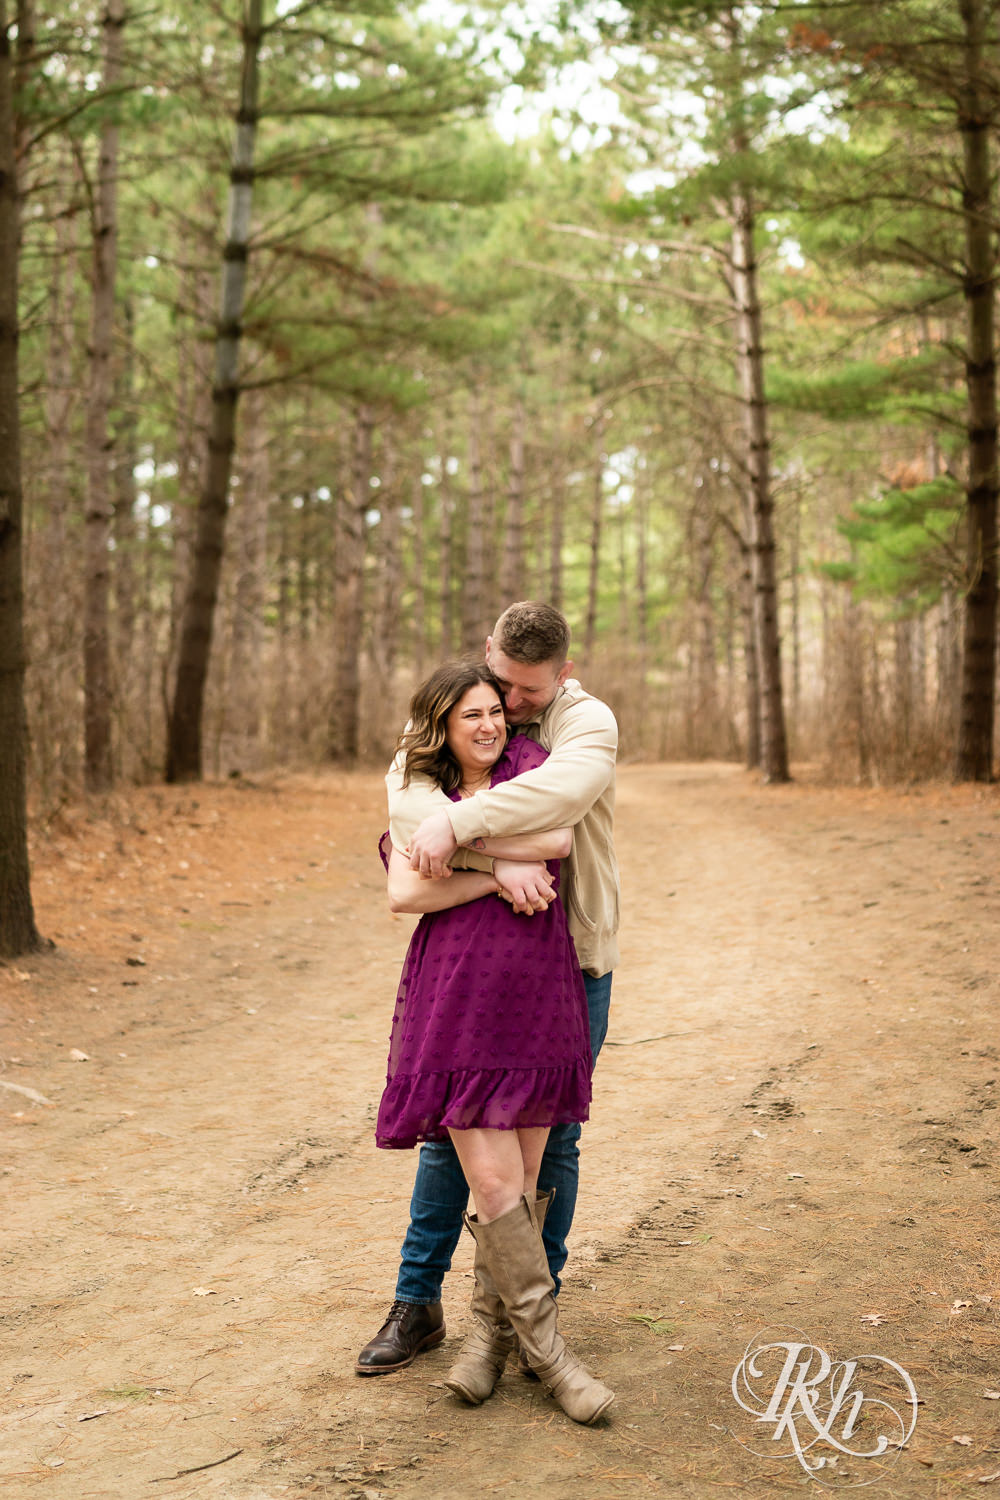 Man in jeans and woman in magenta dress laugh and hug in the woods in Lebanon Hills in Eagan, Minnesota.